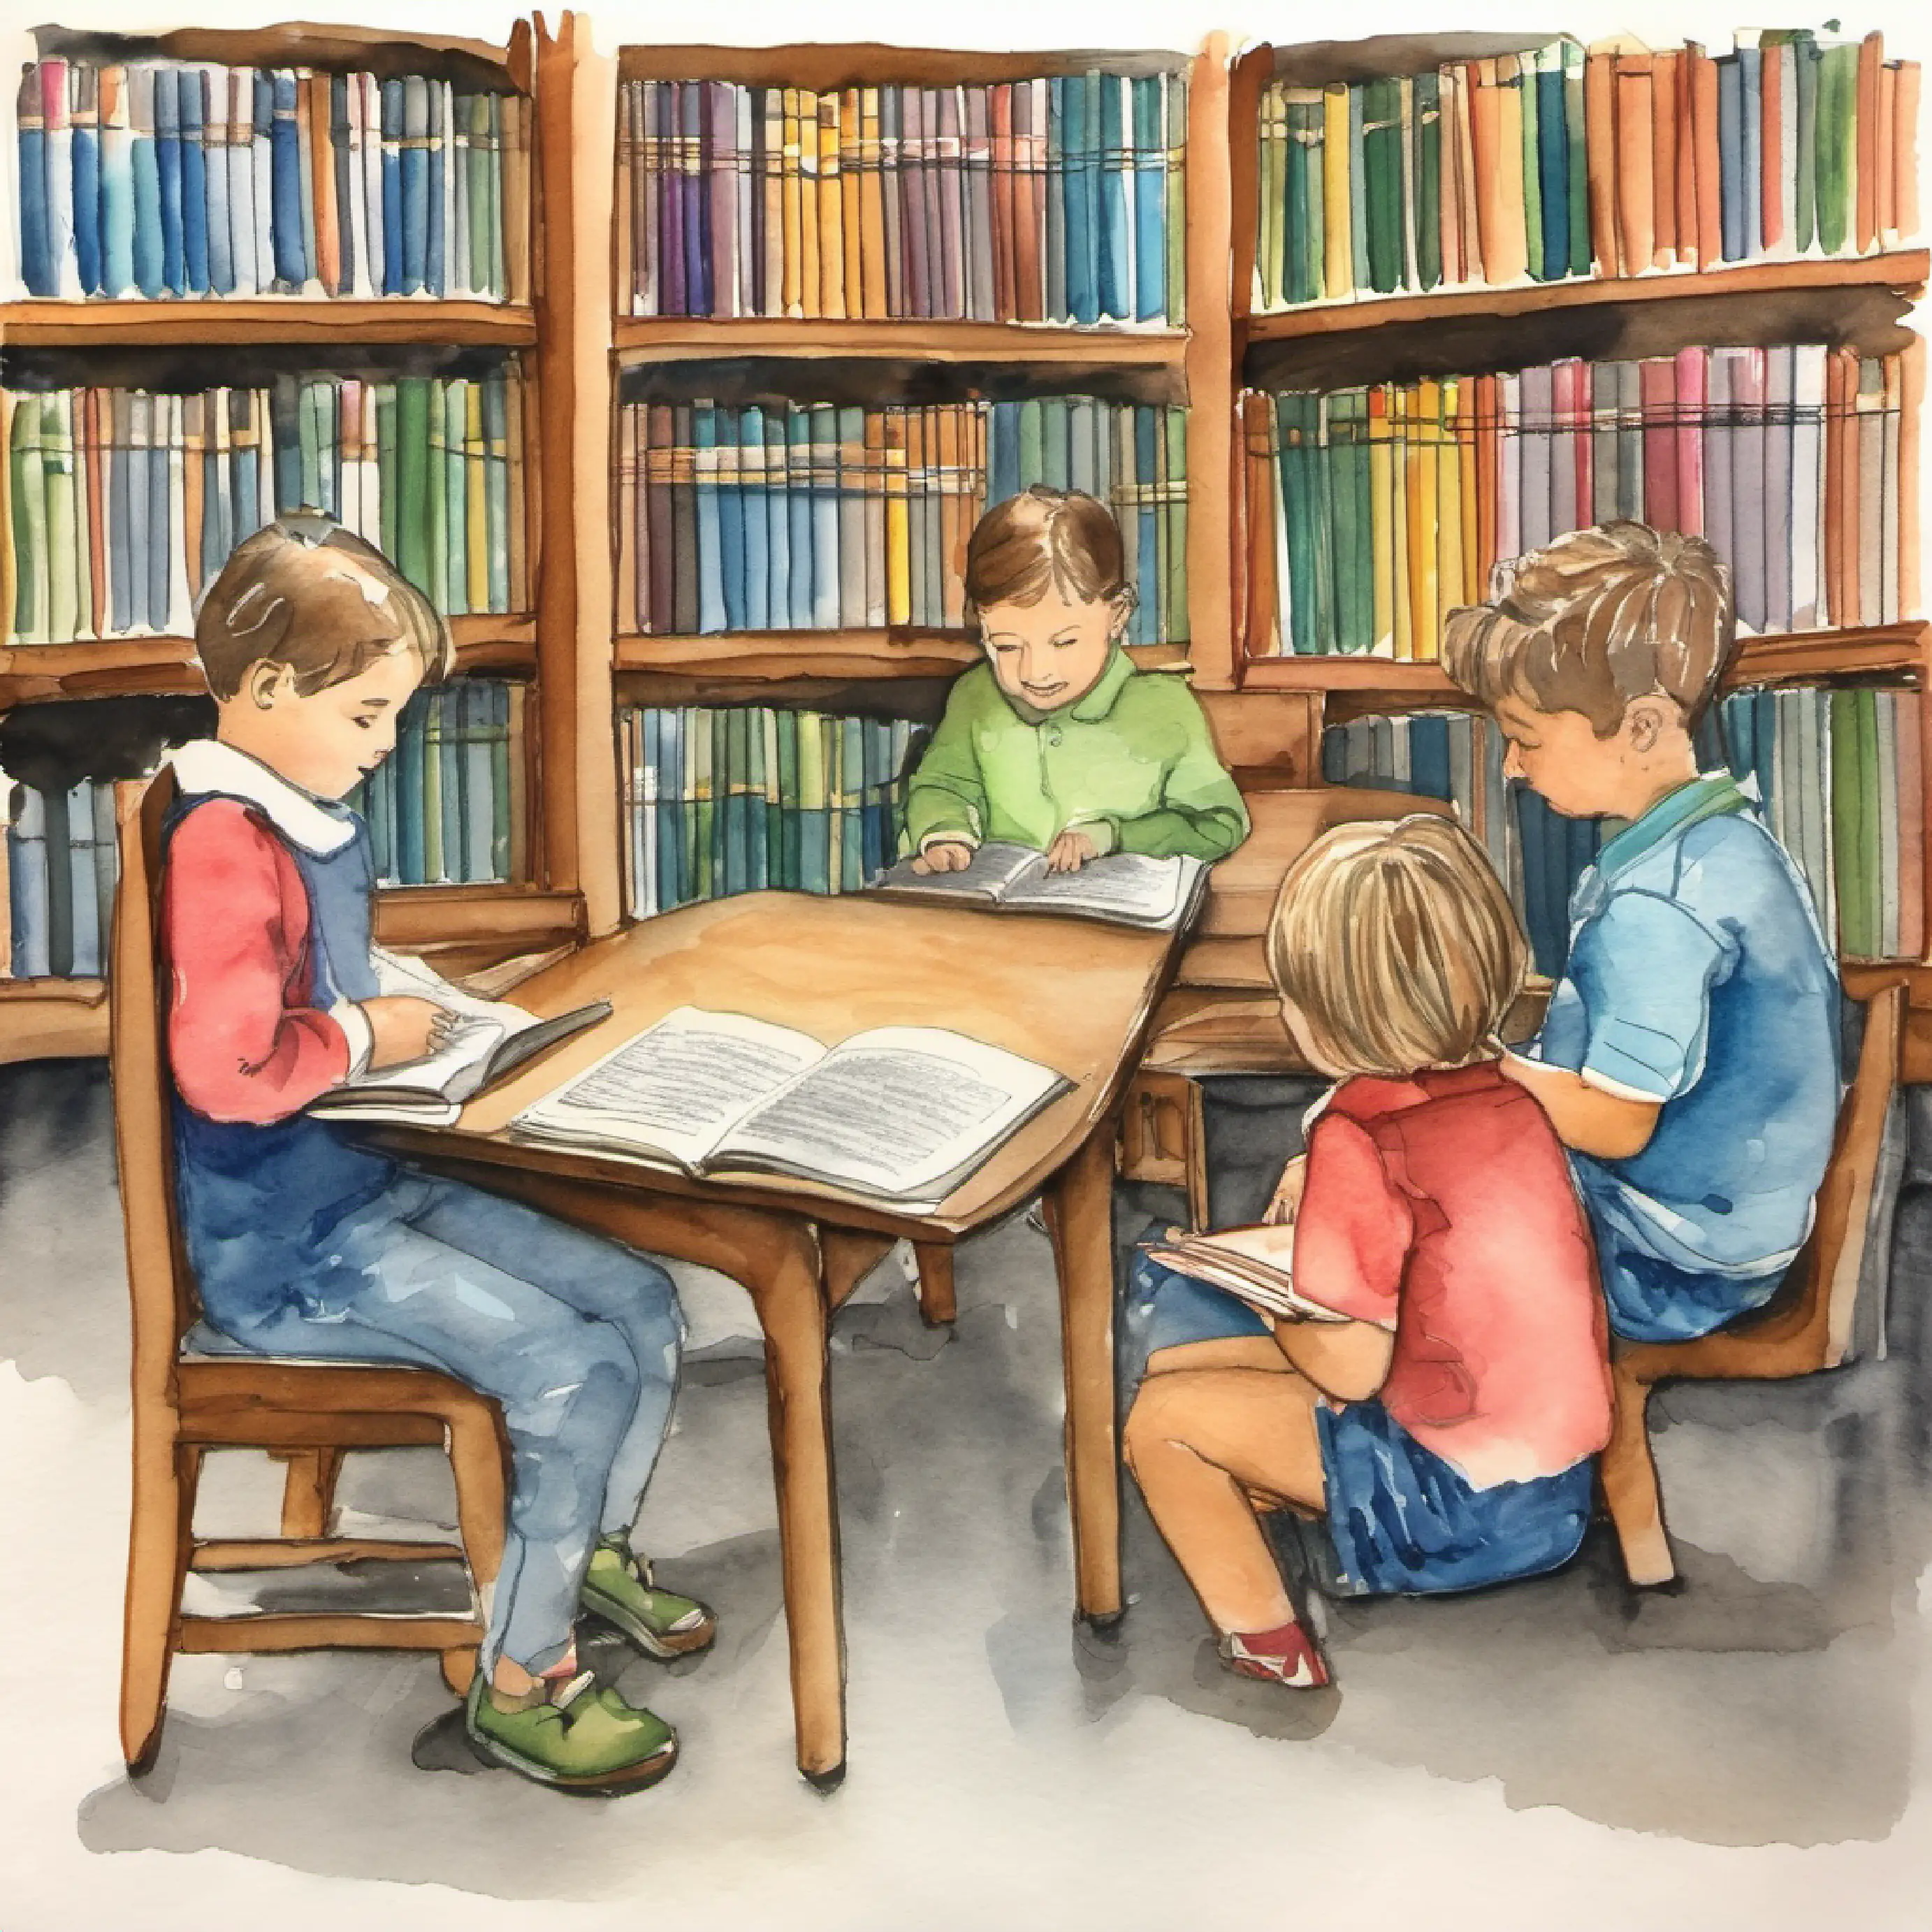 At the Library, Six and Seven are reading; Five isn't there.